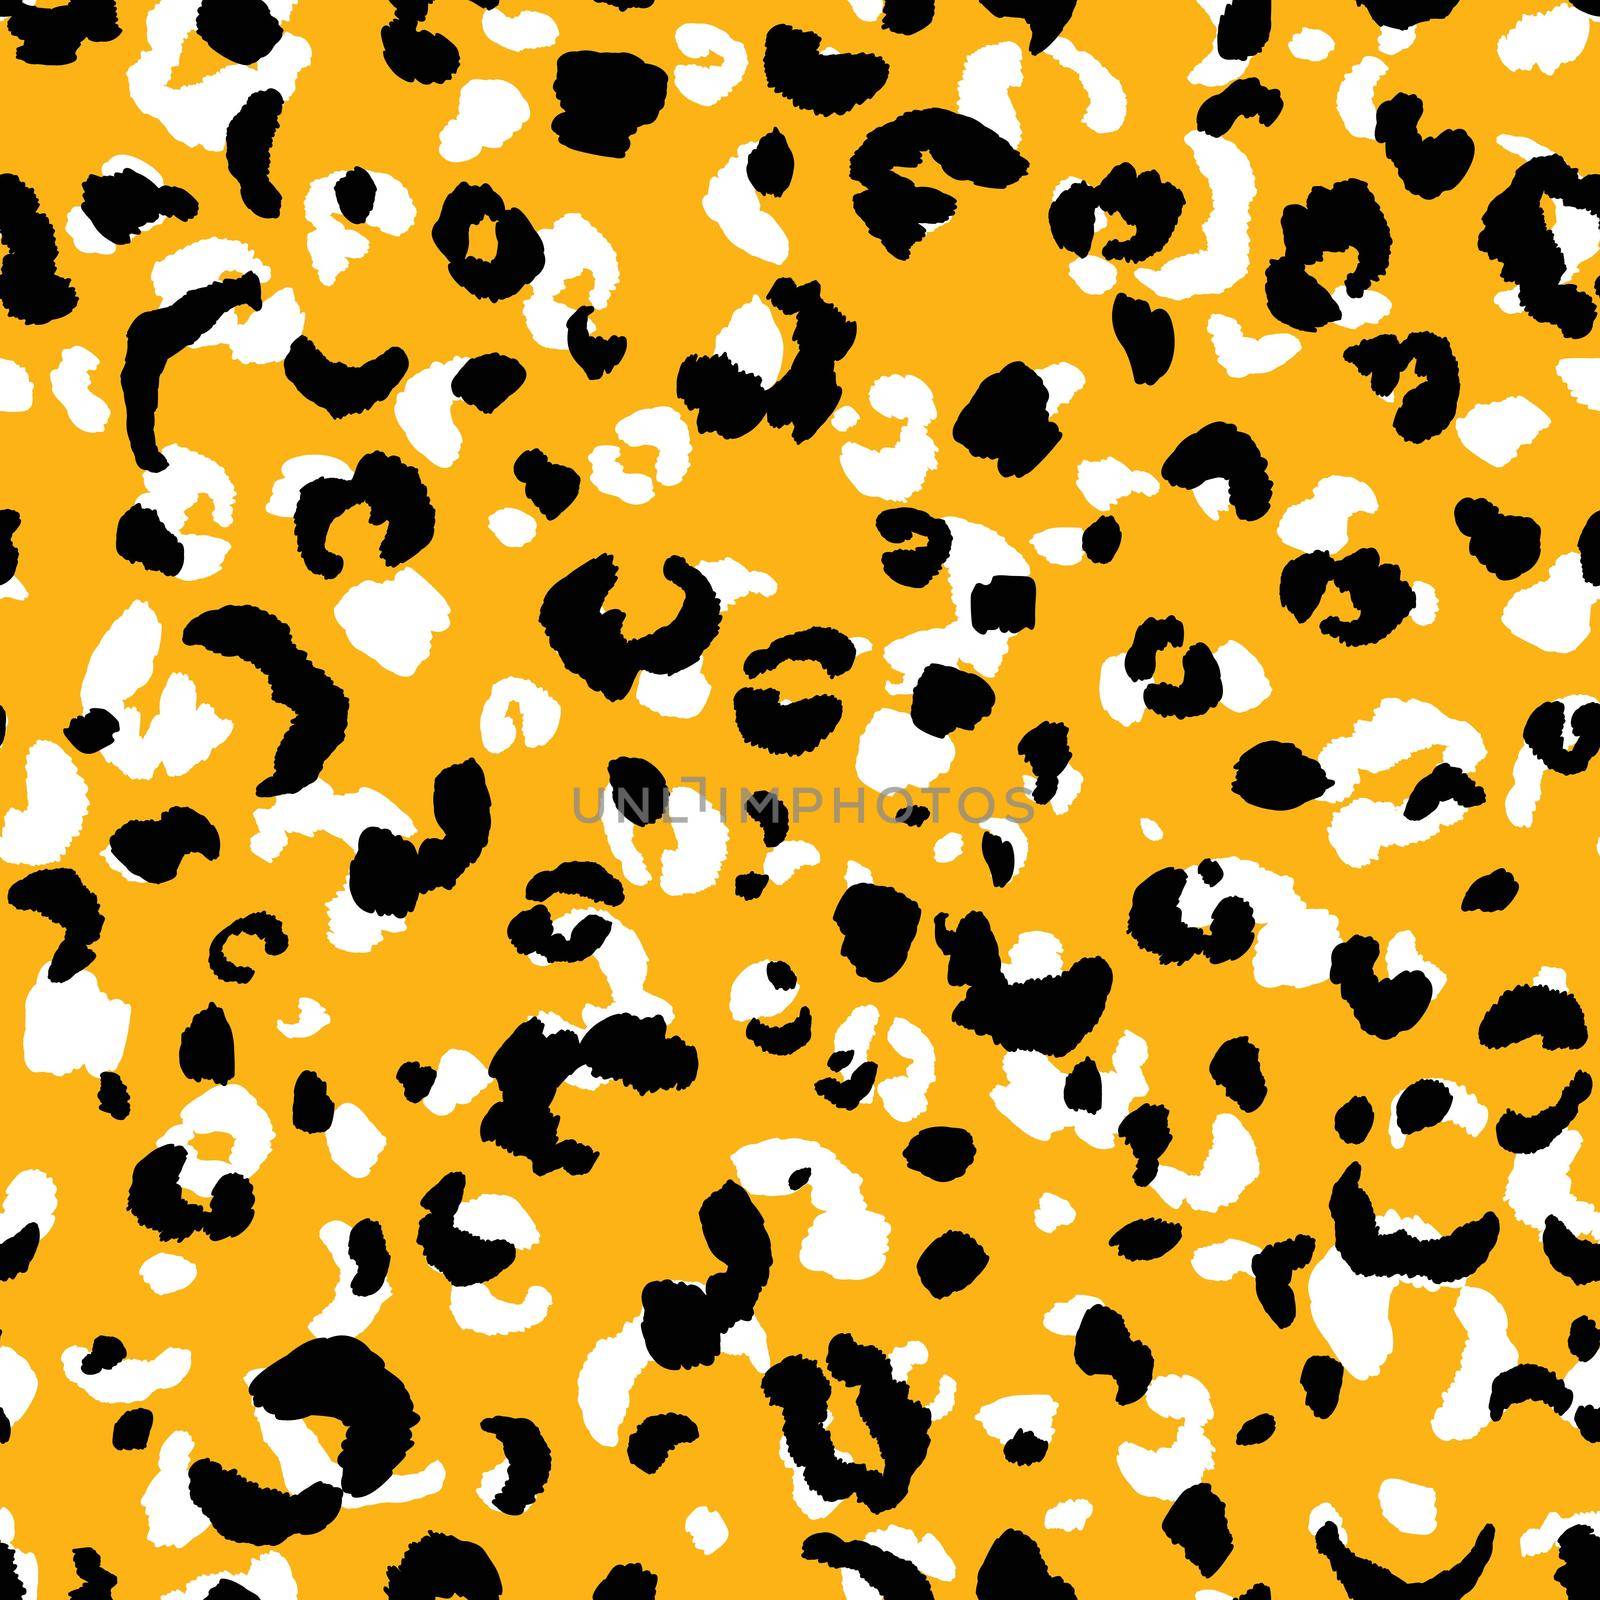 Abstract modern leopard seamless pattern. Animals trendy background. Orange and black decorative vector stock illustration for print, card, postcard, fabric, textile. Modern ornament of stylized skin by allaku